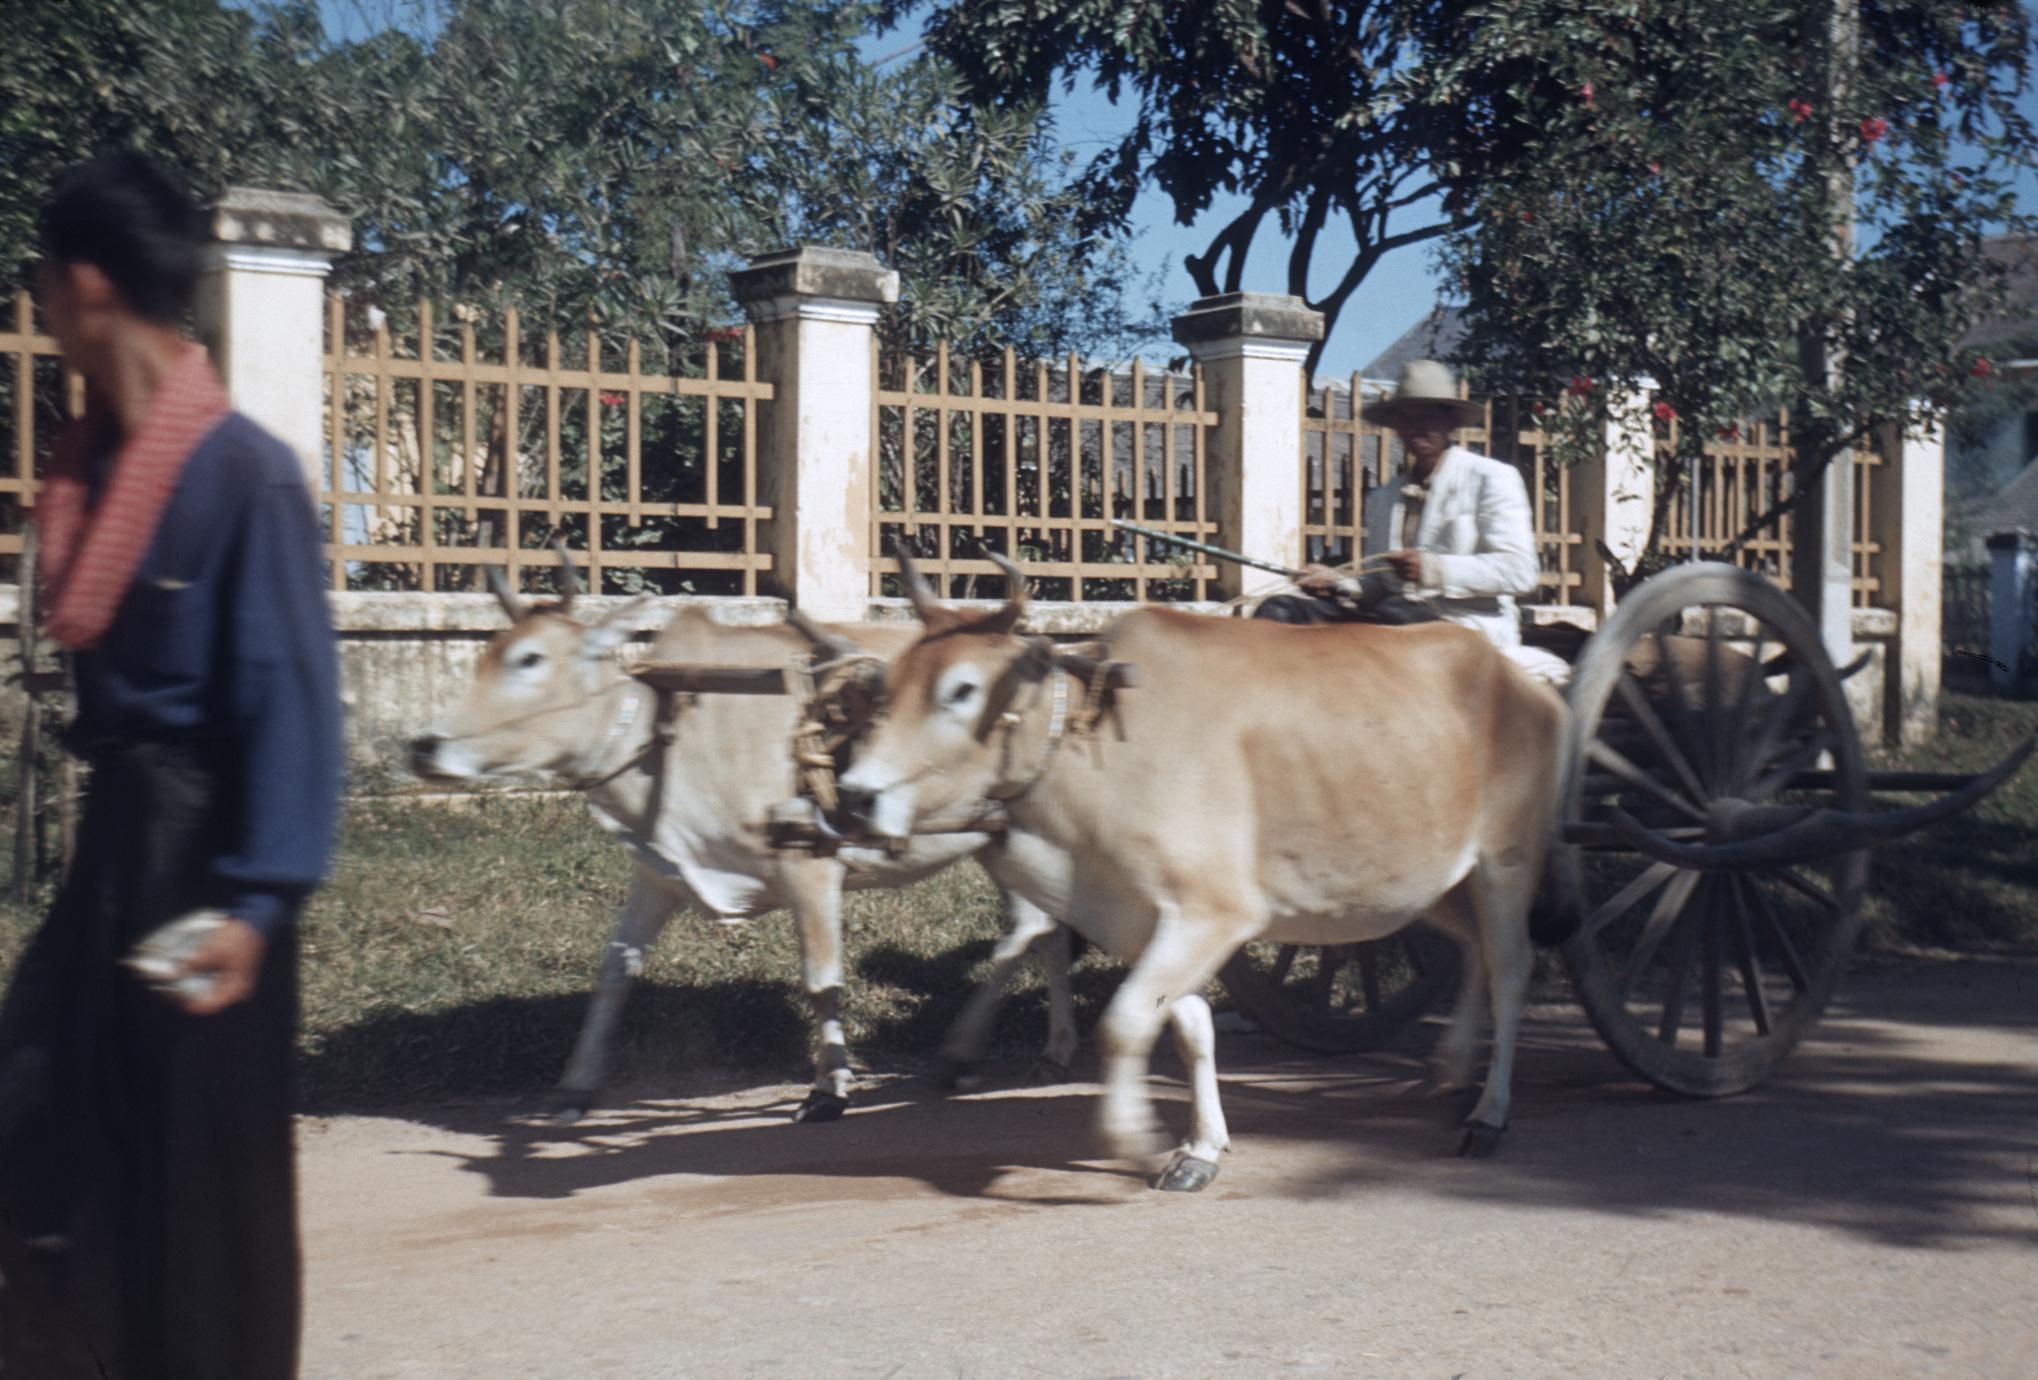 Siem Reap : village and cattle